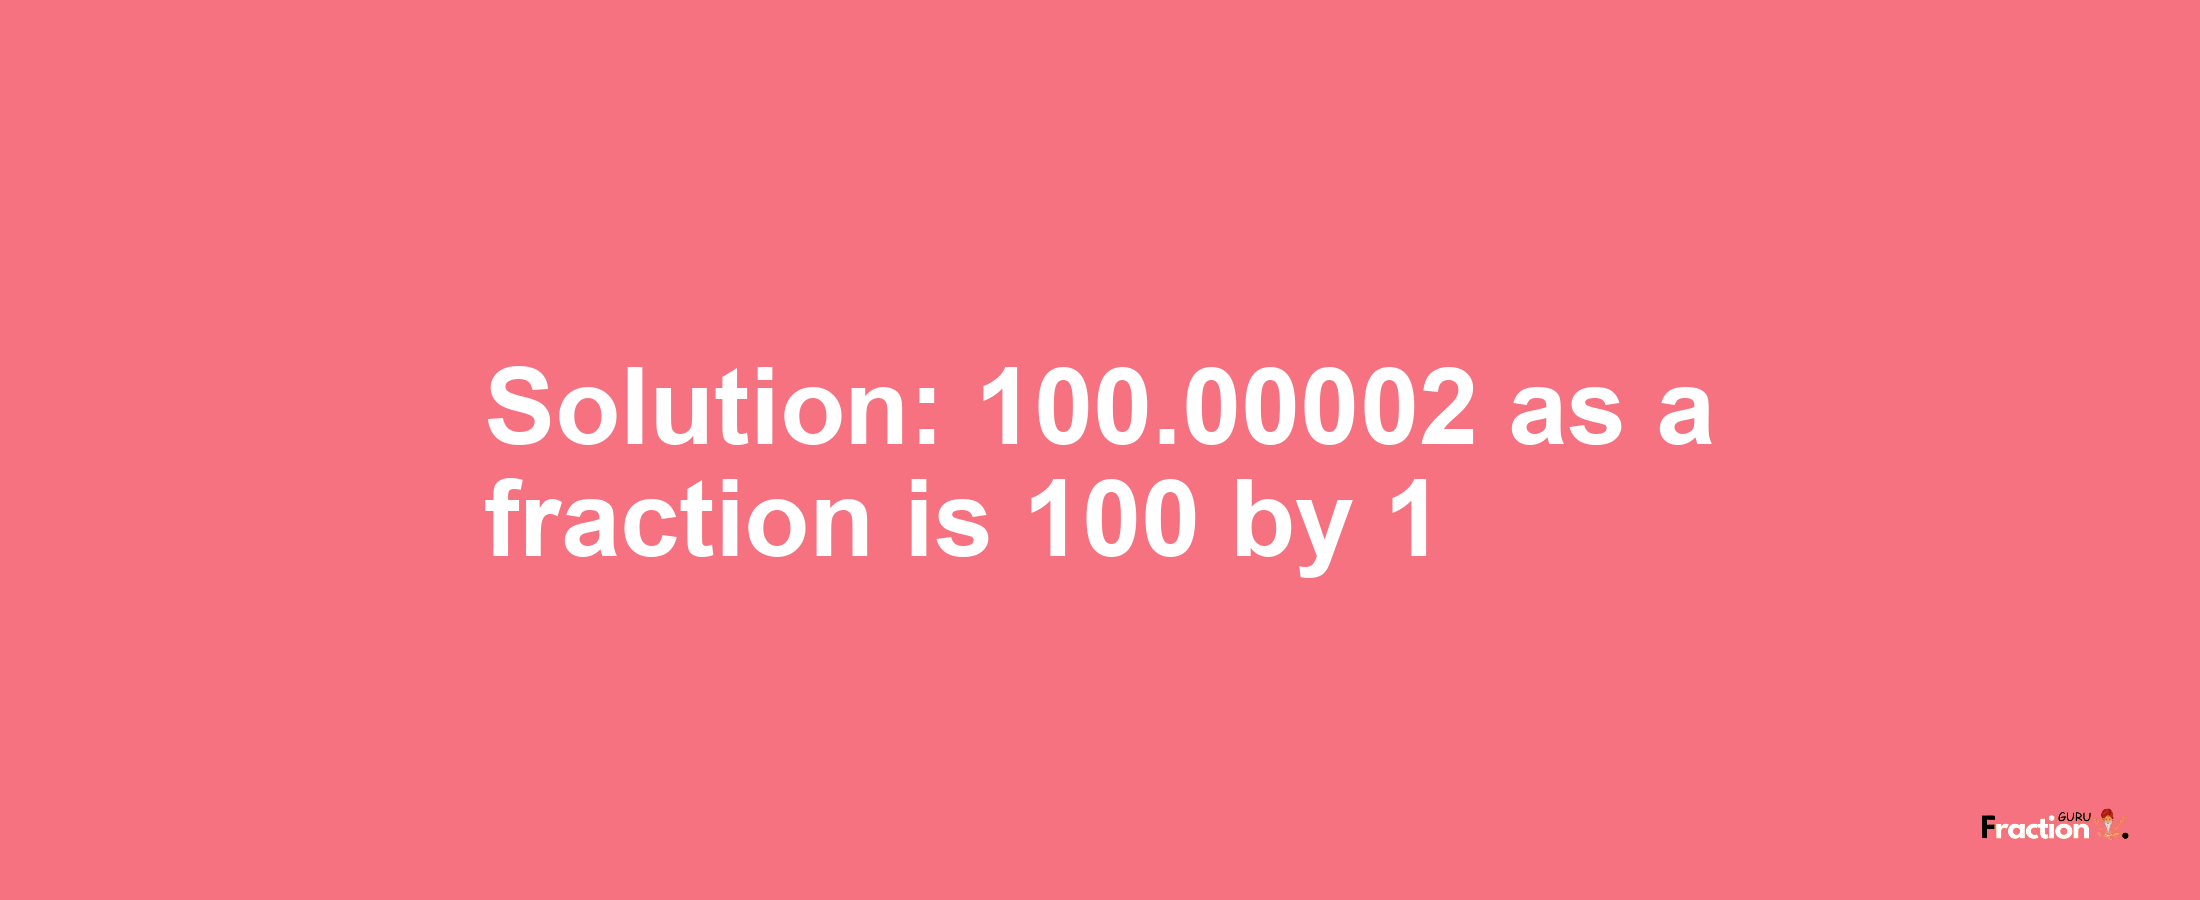 Solution:100.00002 as a fraction is 100/1